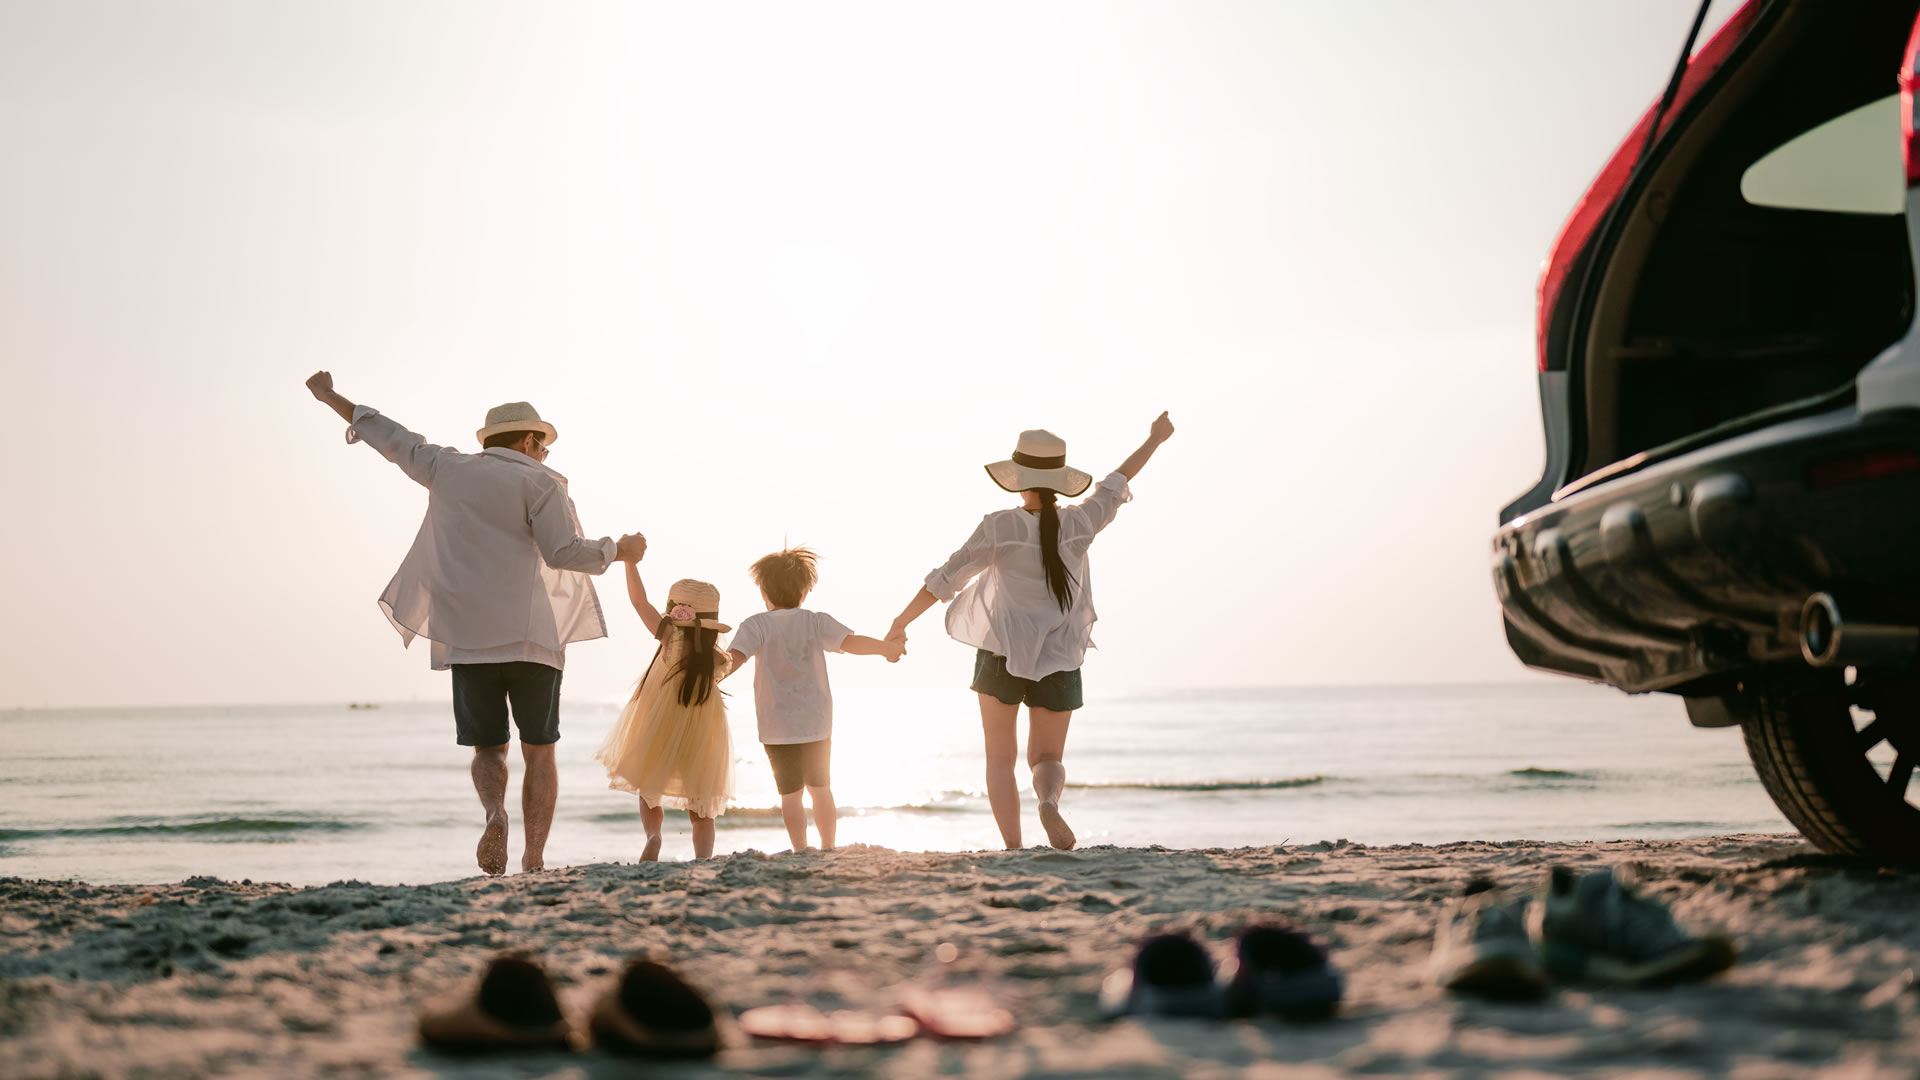 Car Rental and Enjoy a Family Vacation